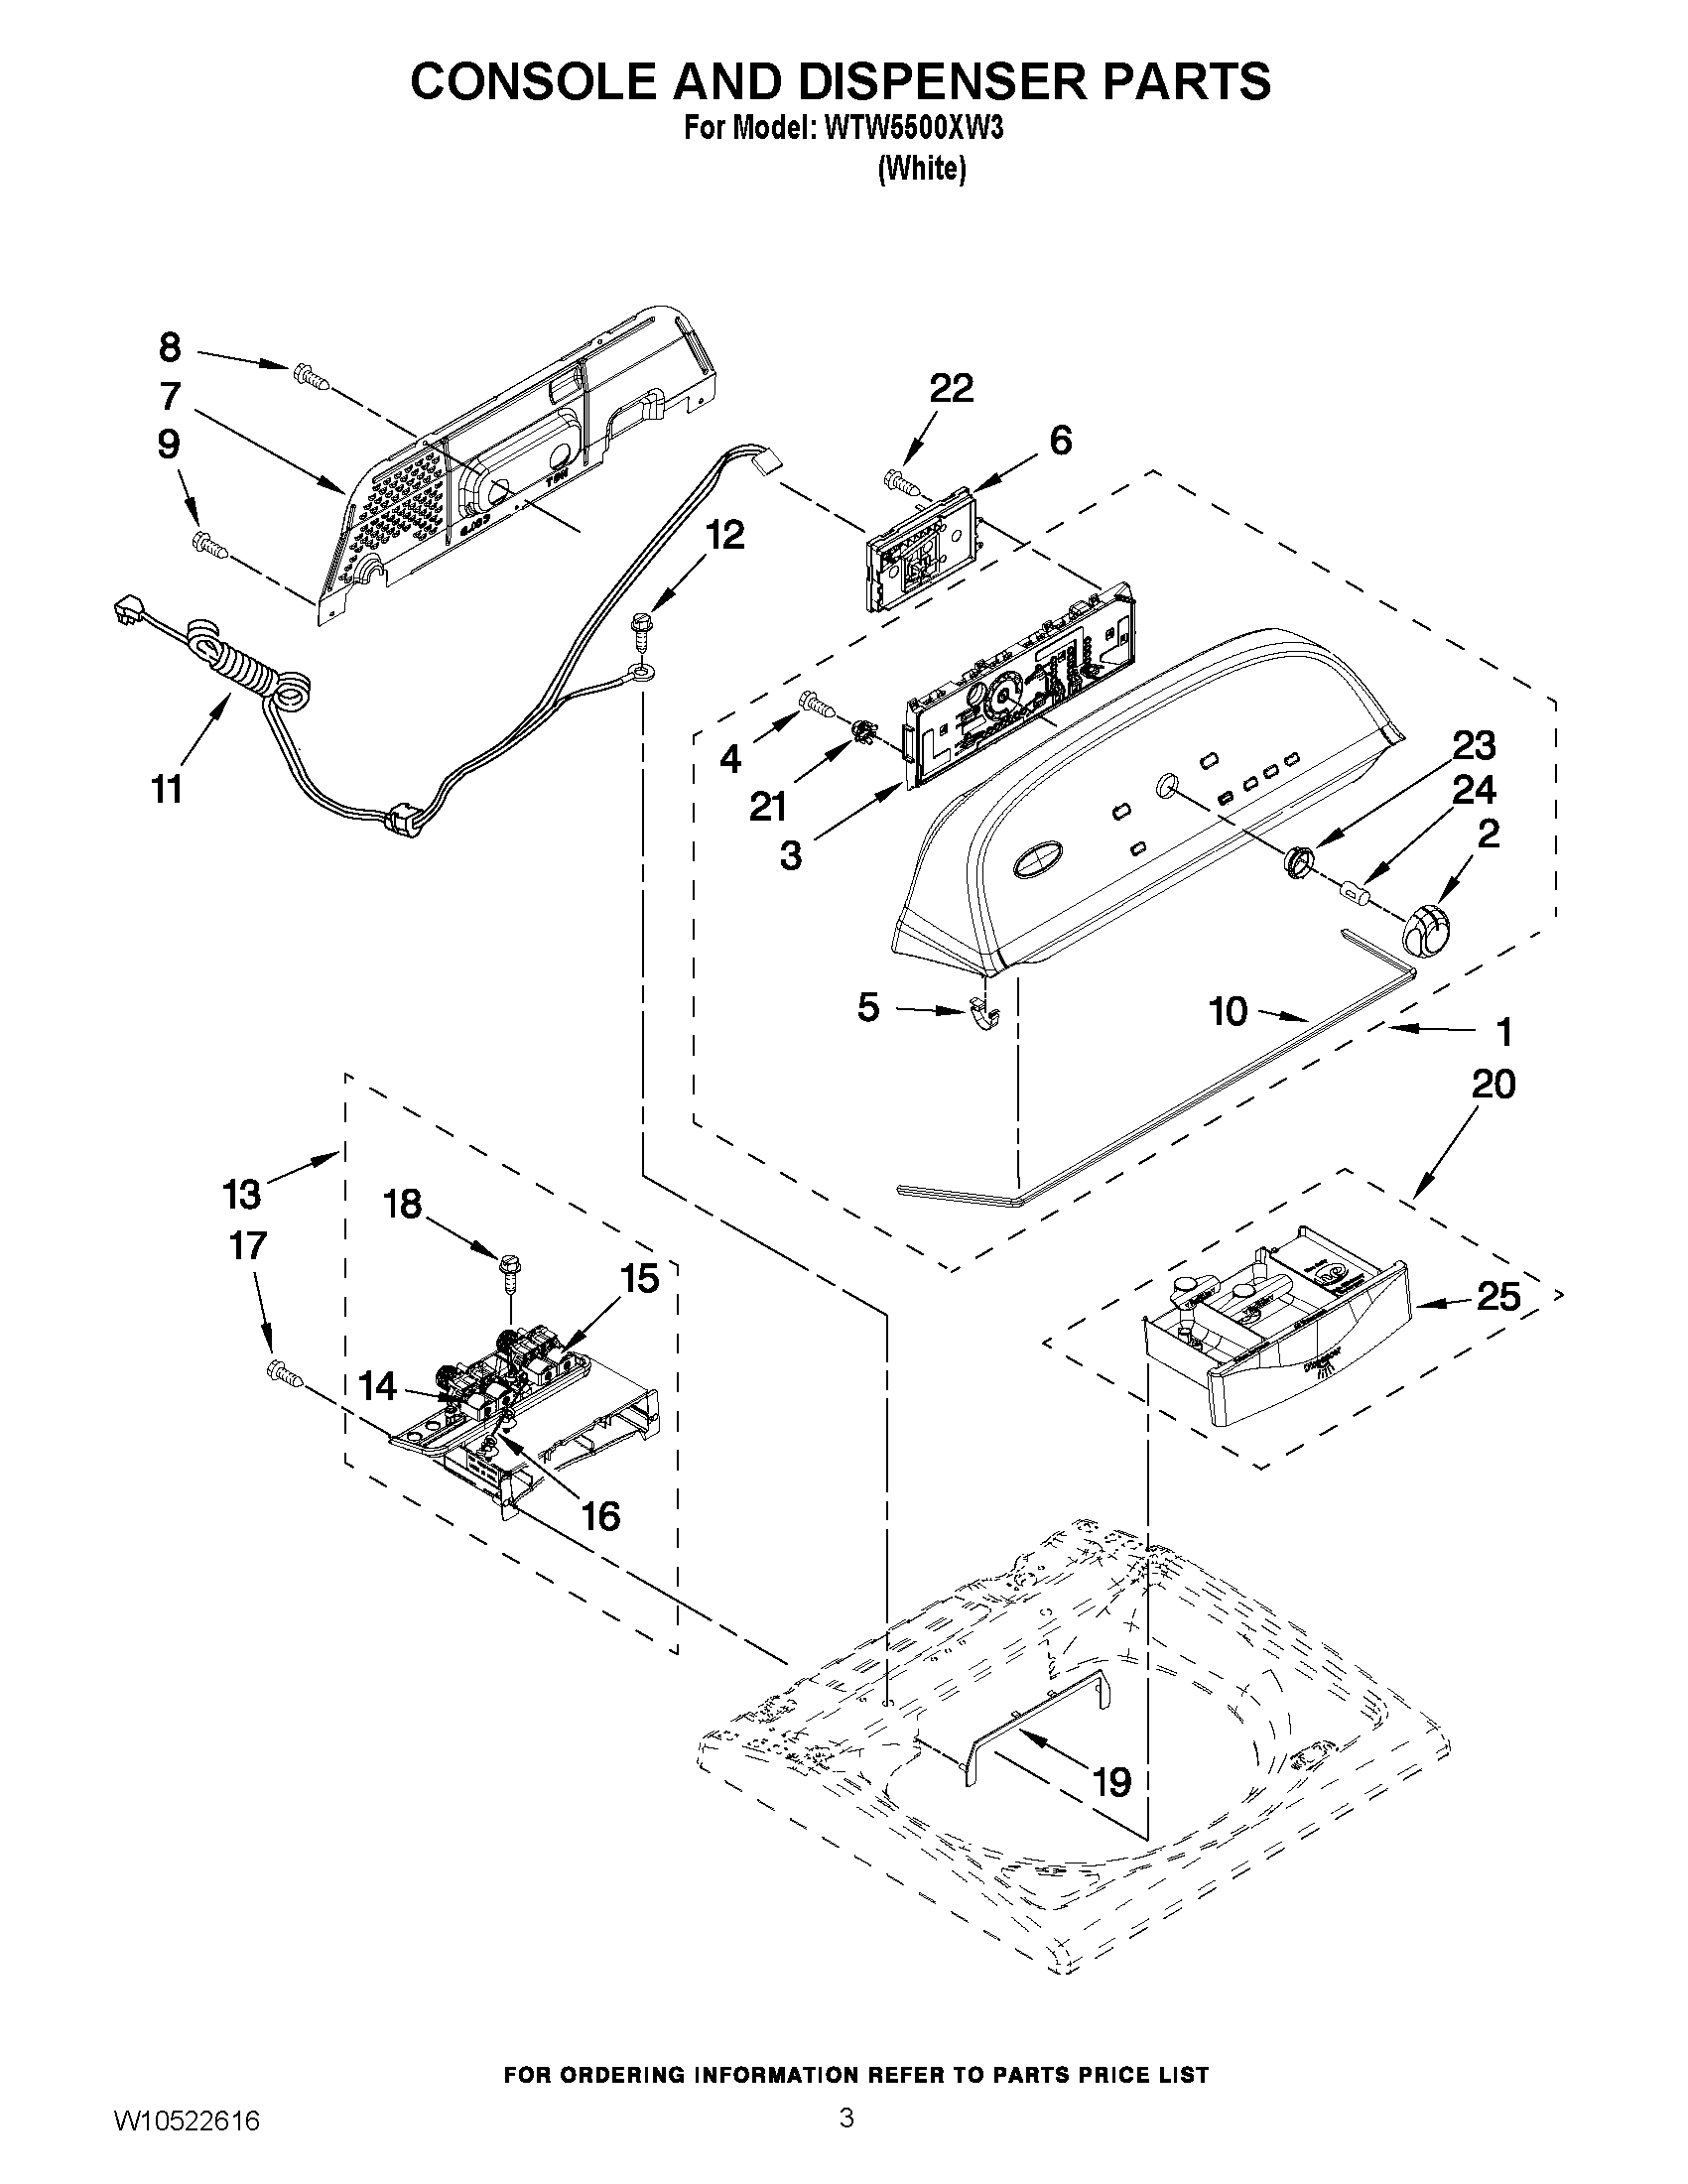 02 - CONSOLE AND DISPENSER PARTS